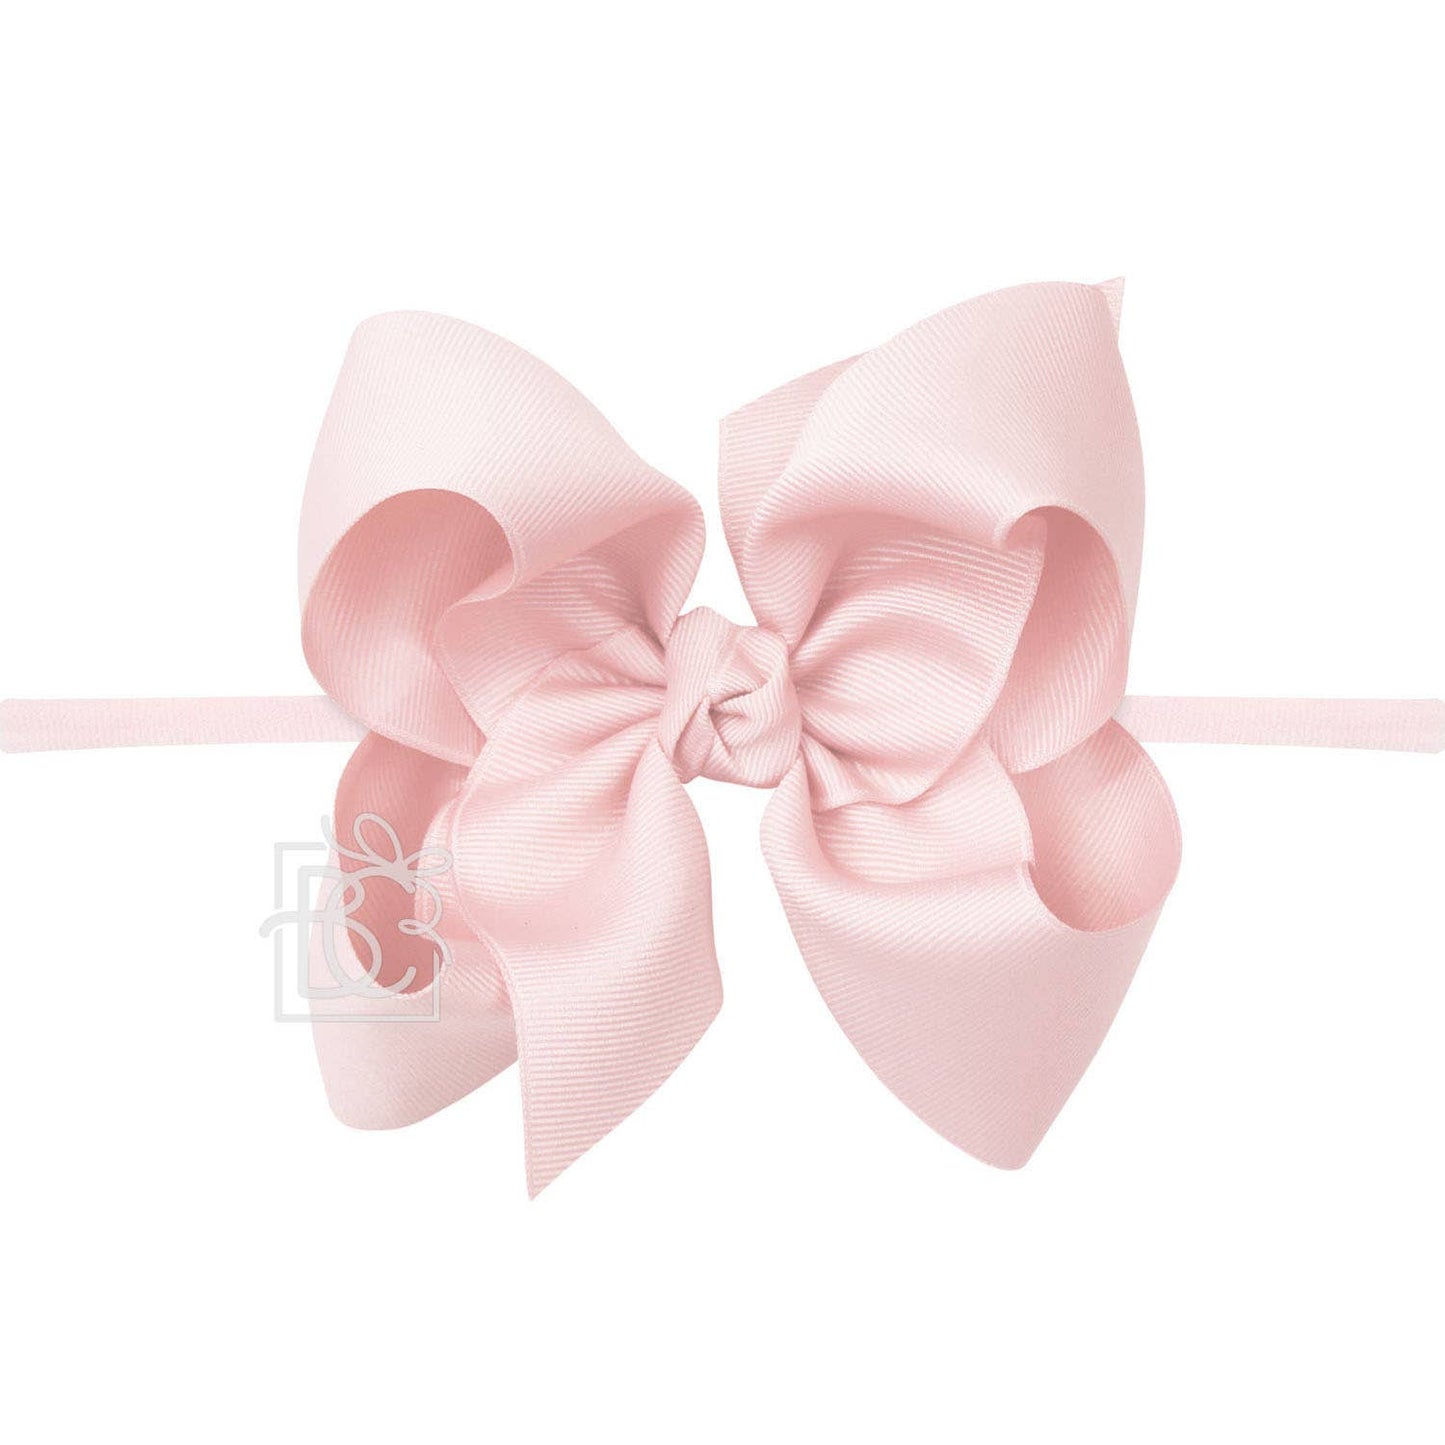 Nylon Headband with Huge Bow in Light Pink  - Doodlebug's Children's Boutique